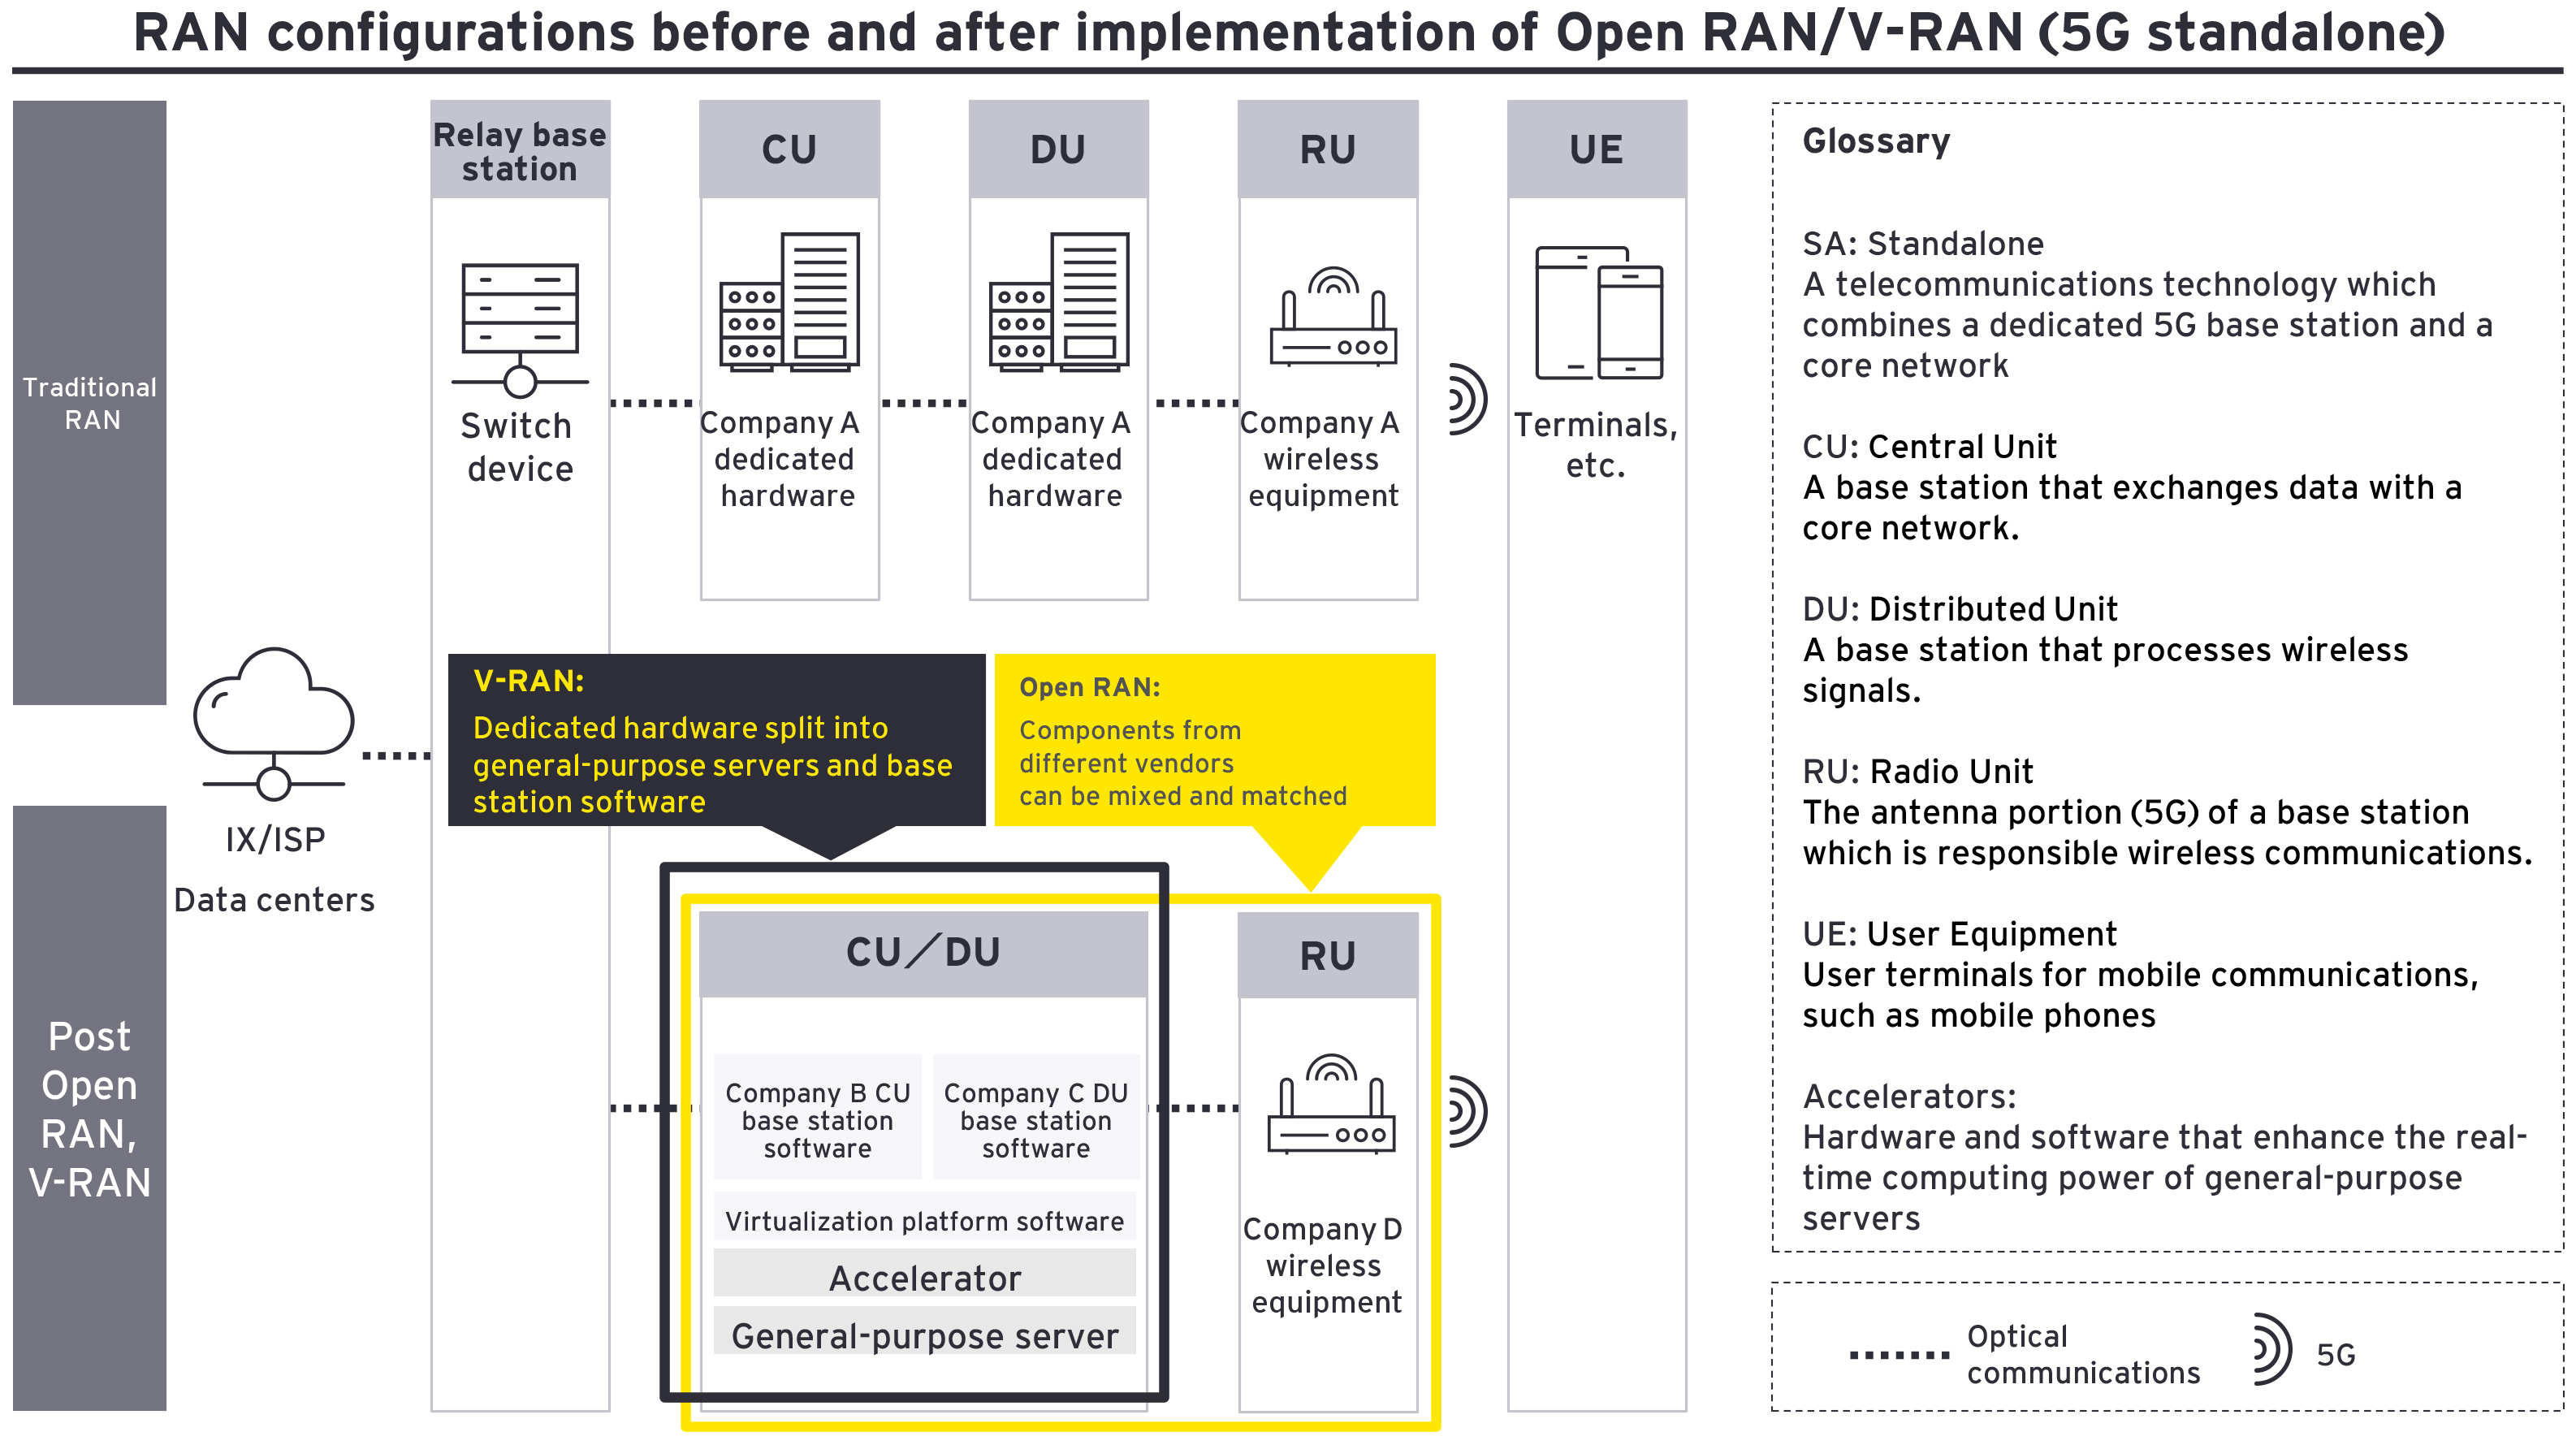 Figure1: RAN configurations before and after implementation of Open RAN/V-RAN (5G standalone)